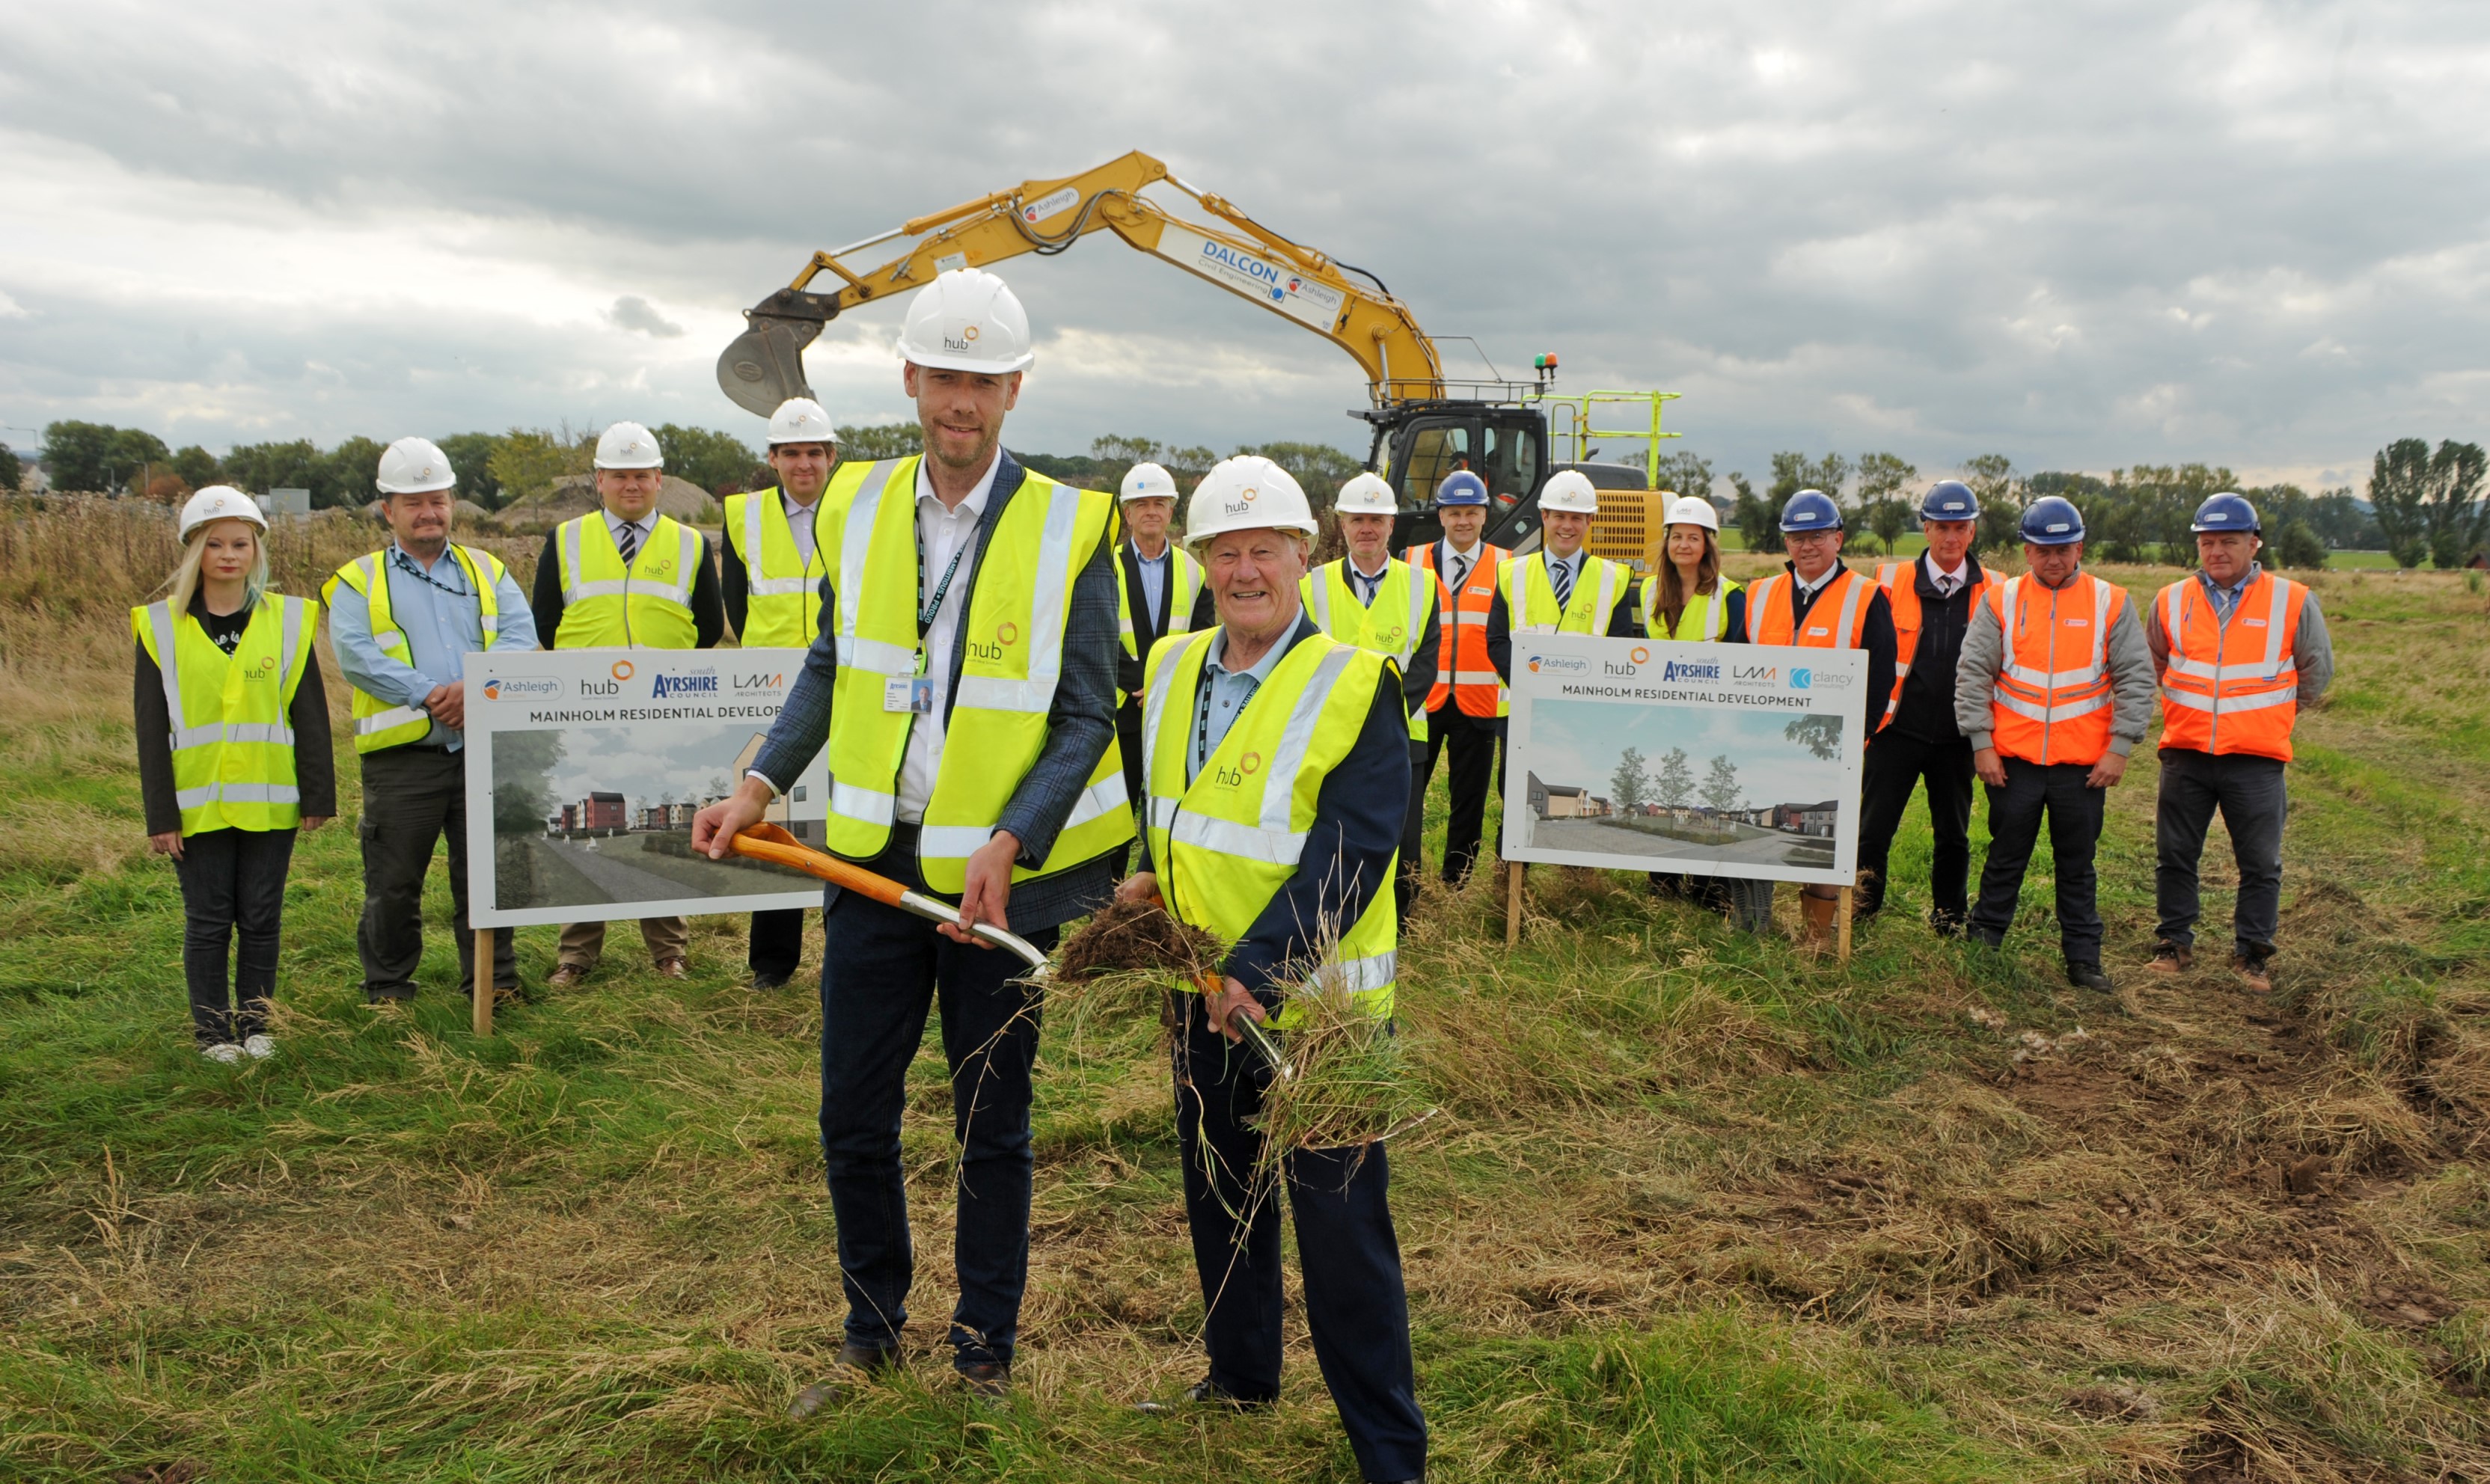 Work to begin on 160 new council homes in Ayr